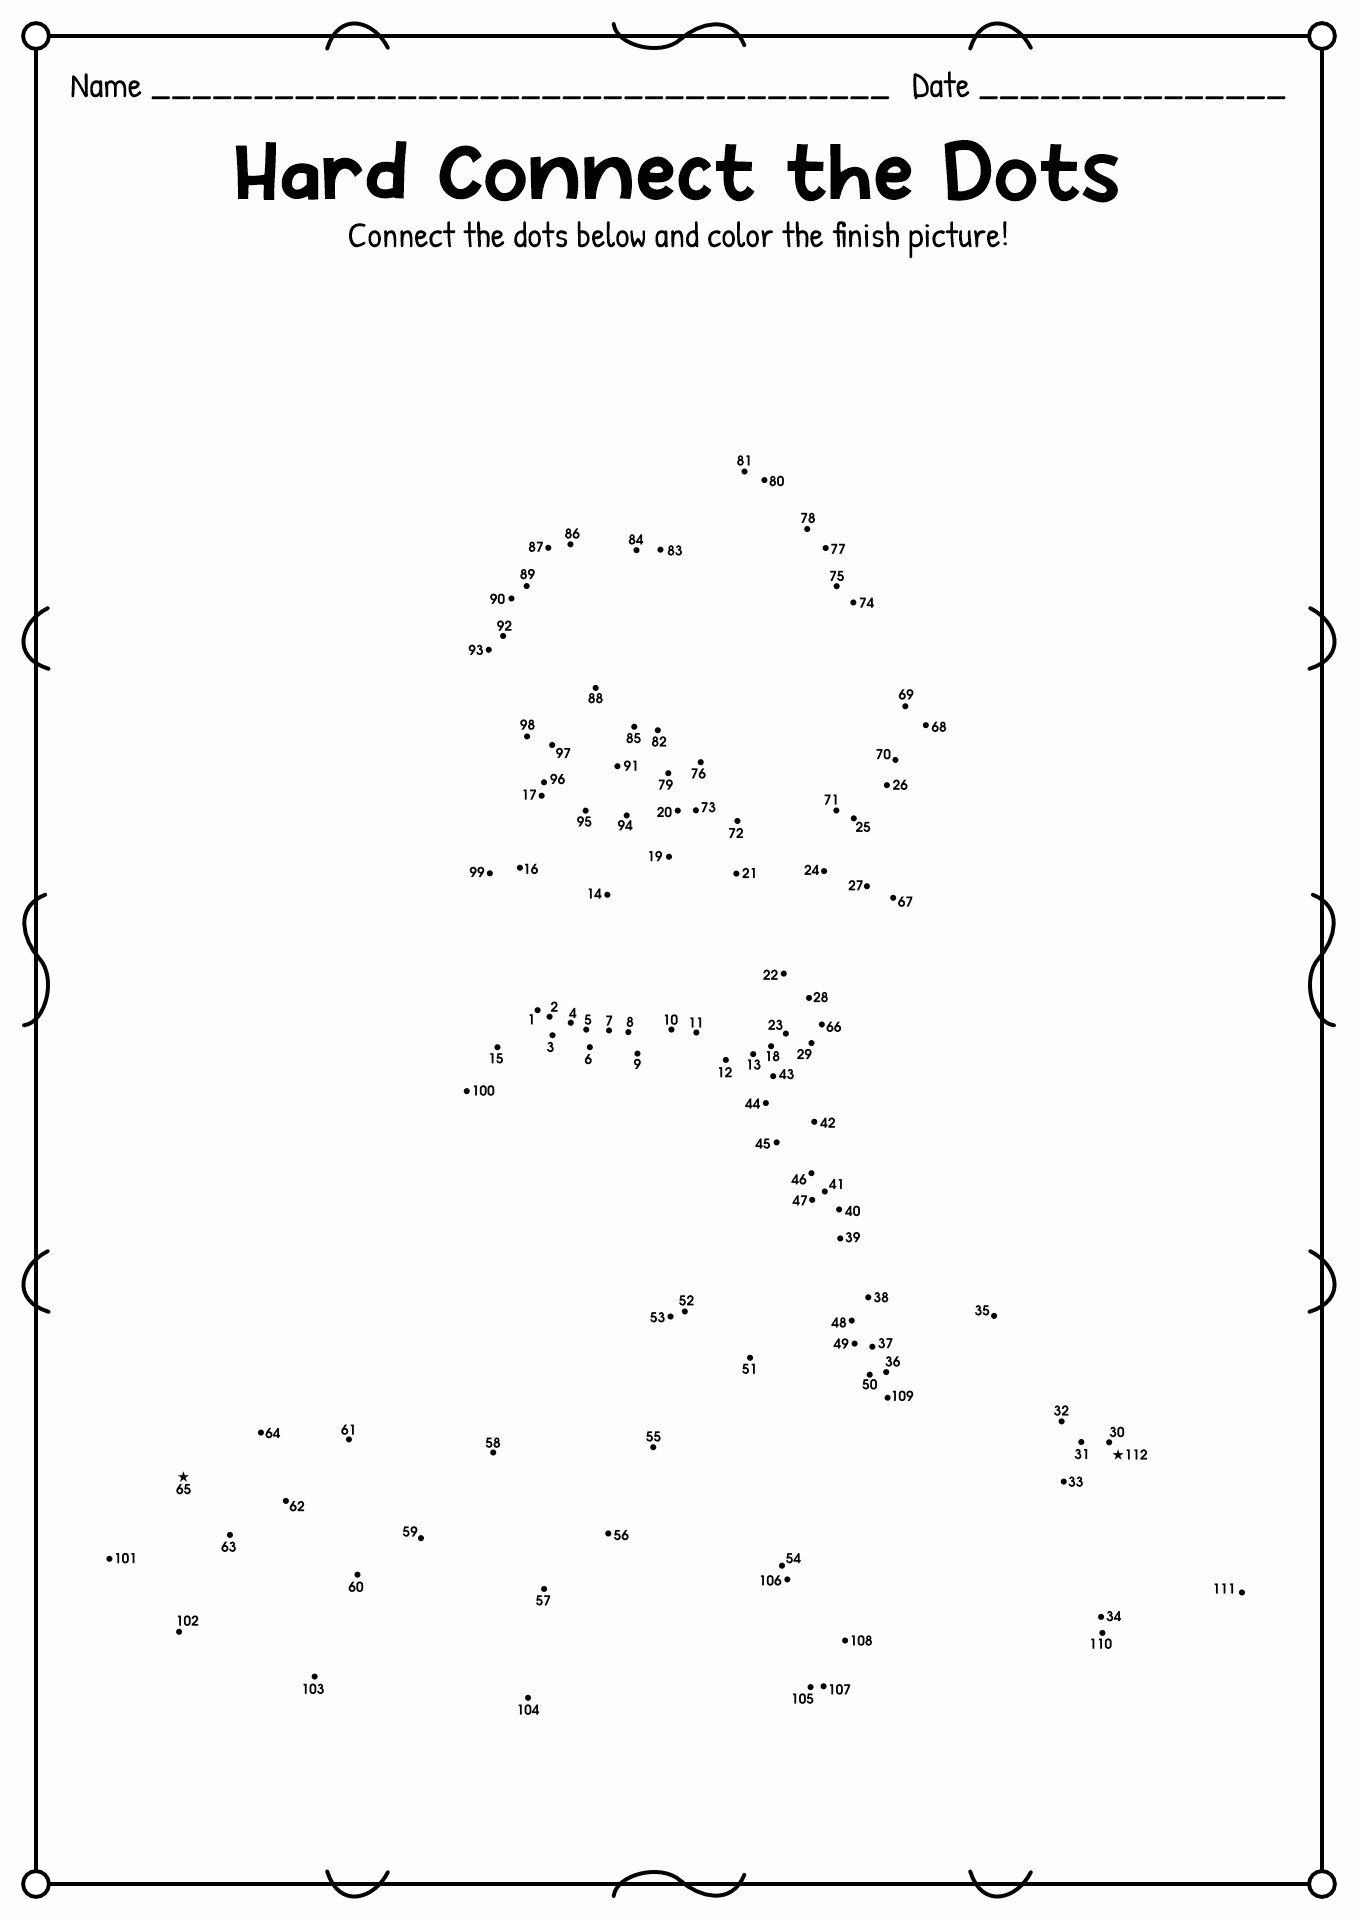 9-best-images-of-printable-dot-to-dot-worksheets-1-100-connect-the